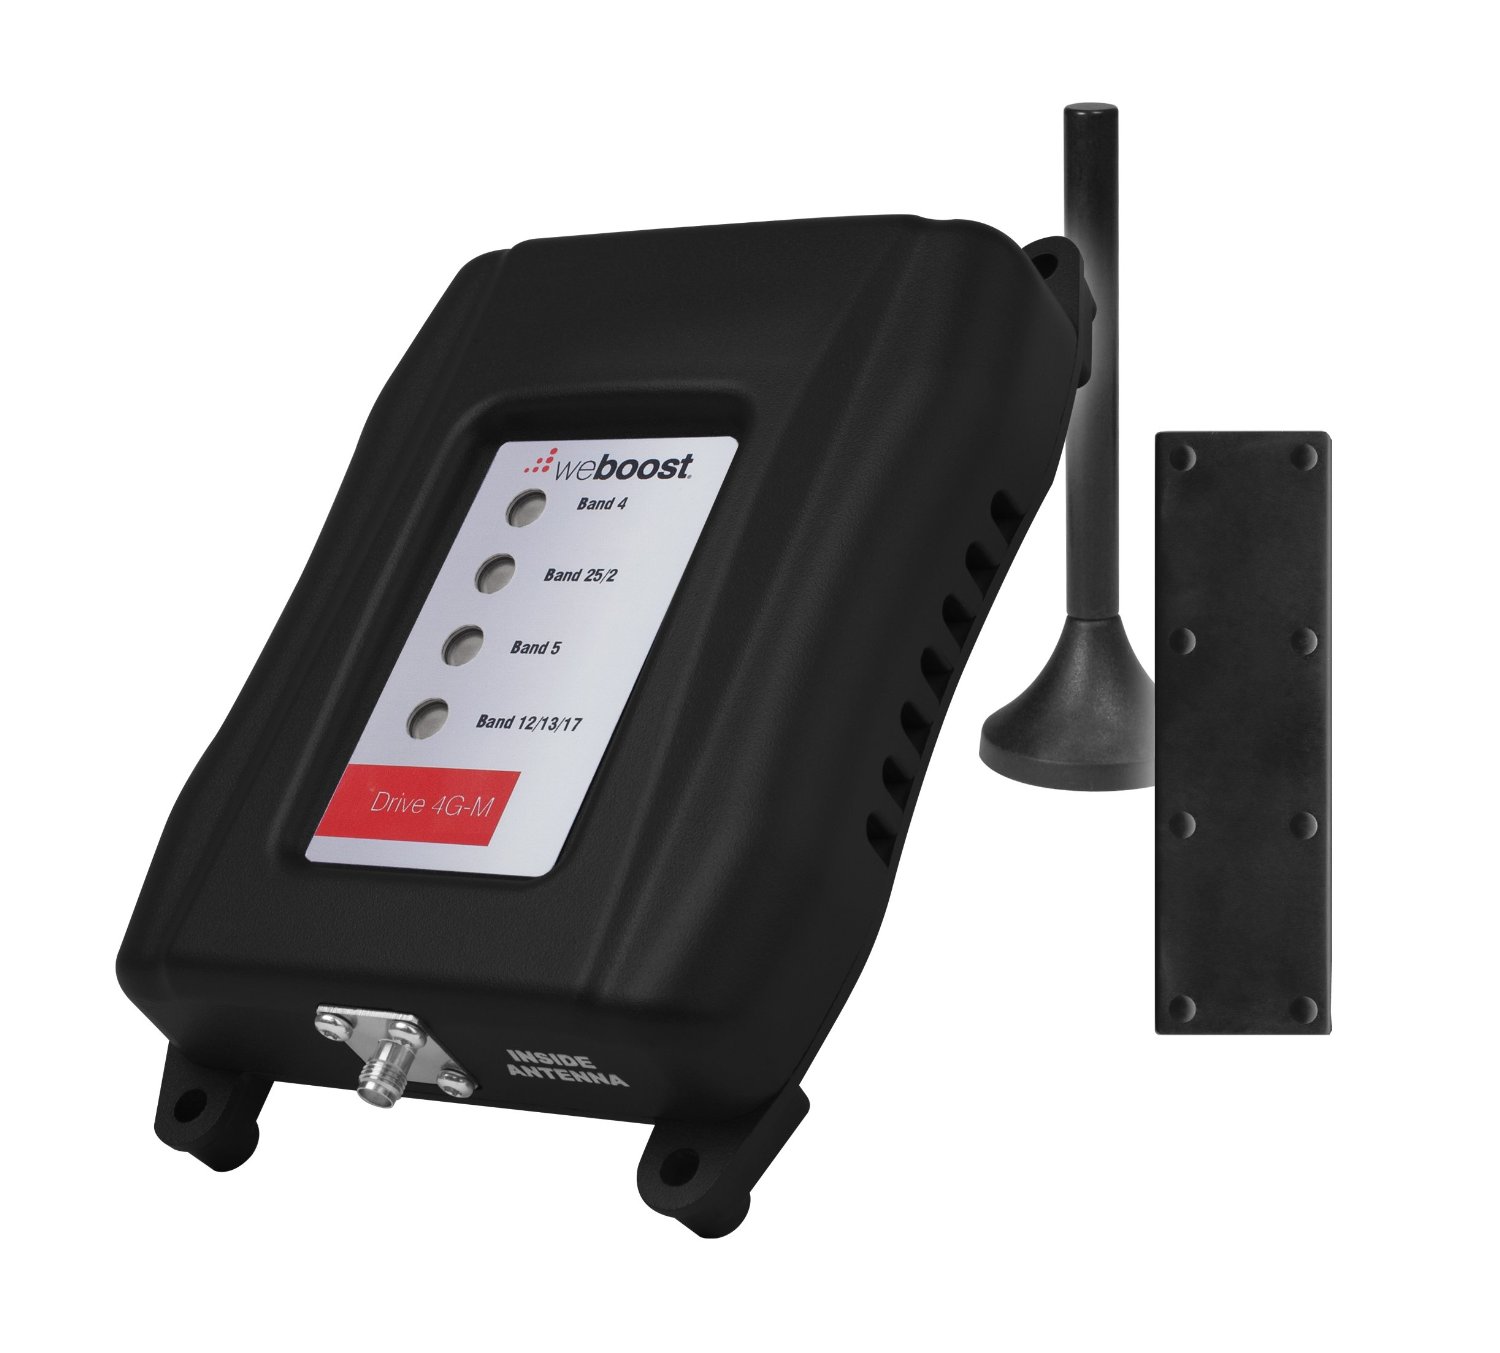 CELL SIGNAL BOOSTER FOR CONSUMER CELLULAR